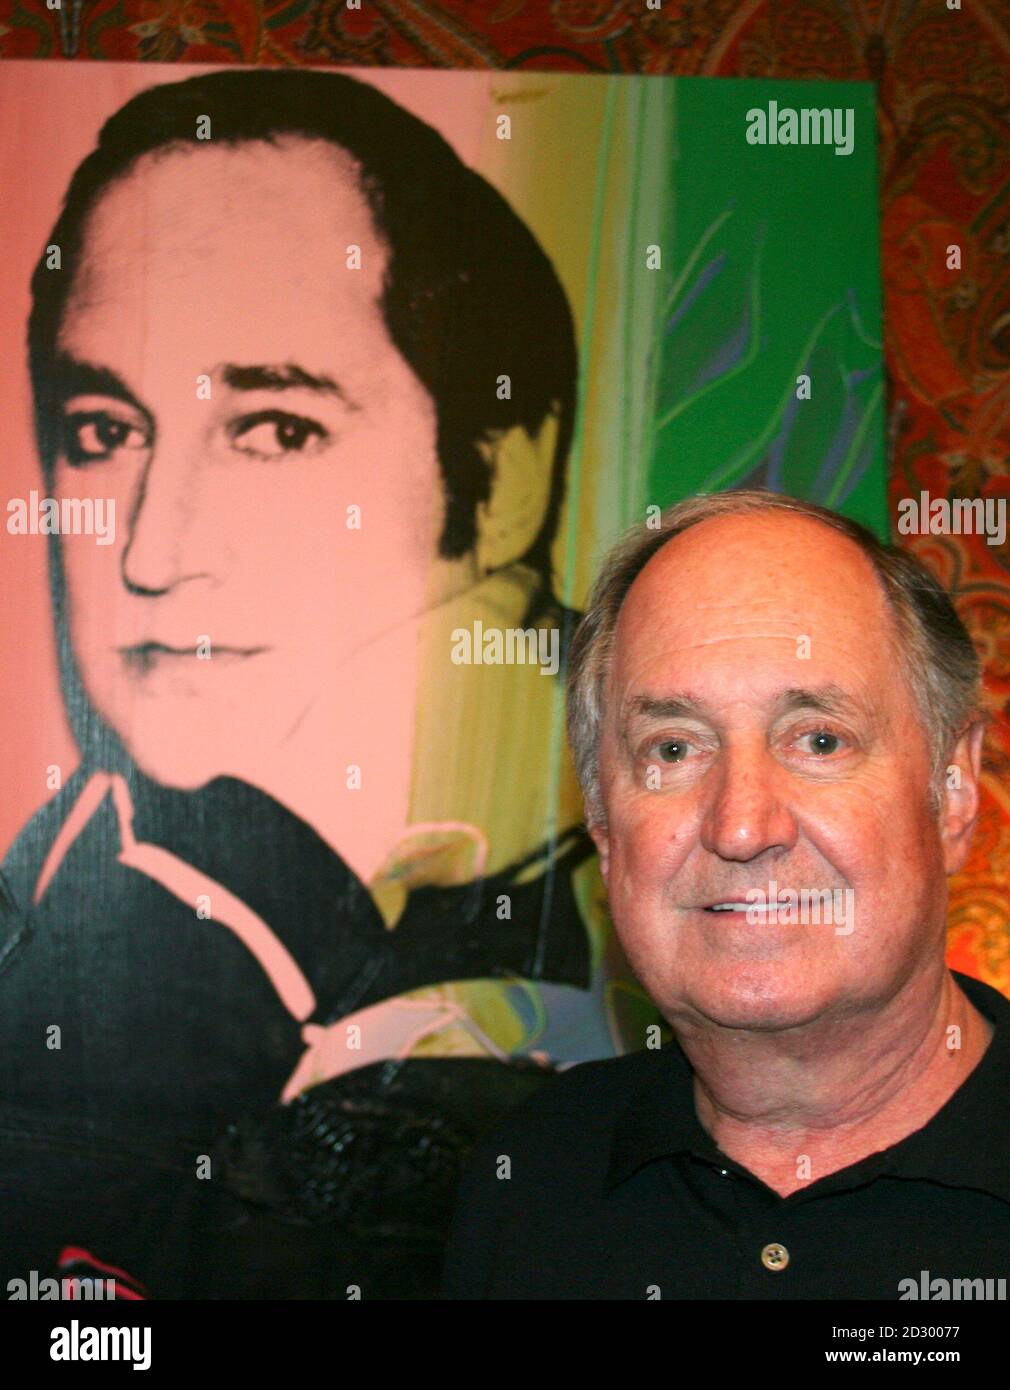 Singer Neil Sedaka poses with an Andy Warhol painting of himself at his apartment in New York January 19, 2010. When Tin Pan Alley ruled the world of pop music, Sedaka was one of the songwriters churning out hits in New York's legendary Brill Building that helped pre-Beatles teenagers go to the hop, fall in love and break up. Now, 50 years later, with over 1,000 songs to his credit, he has recorded 'The Music of My Life,' an album of original songs he performs that hit stores on January 26, 2010.      REUTERS/Steve James (UNITED STATES - Tags: ENTERTAINMENT) Stock Photo